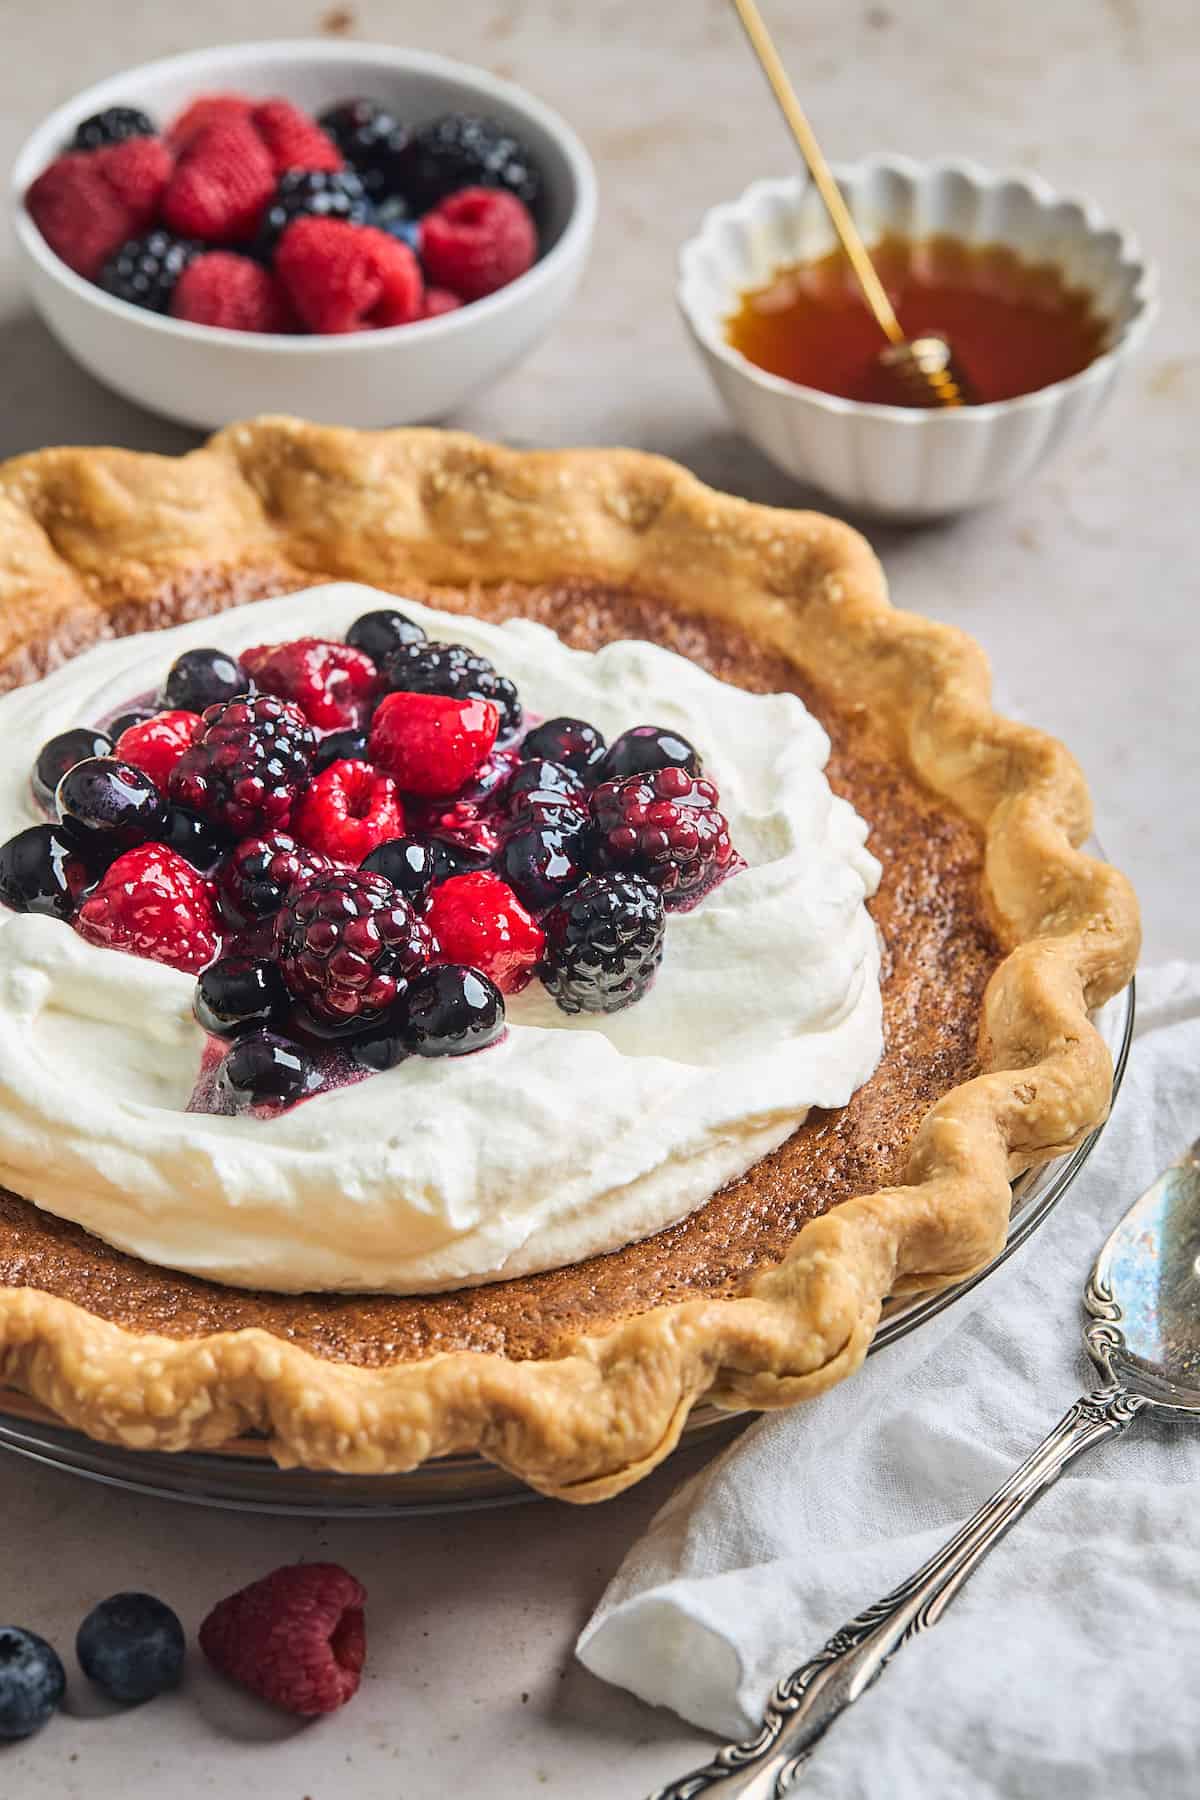 Honey pie topped with fresh whipped cream and berries.